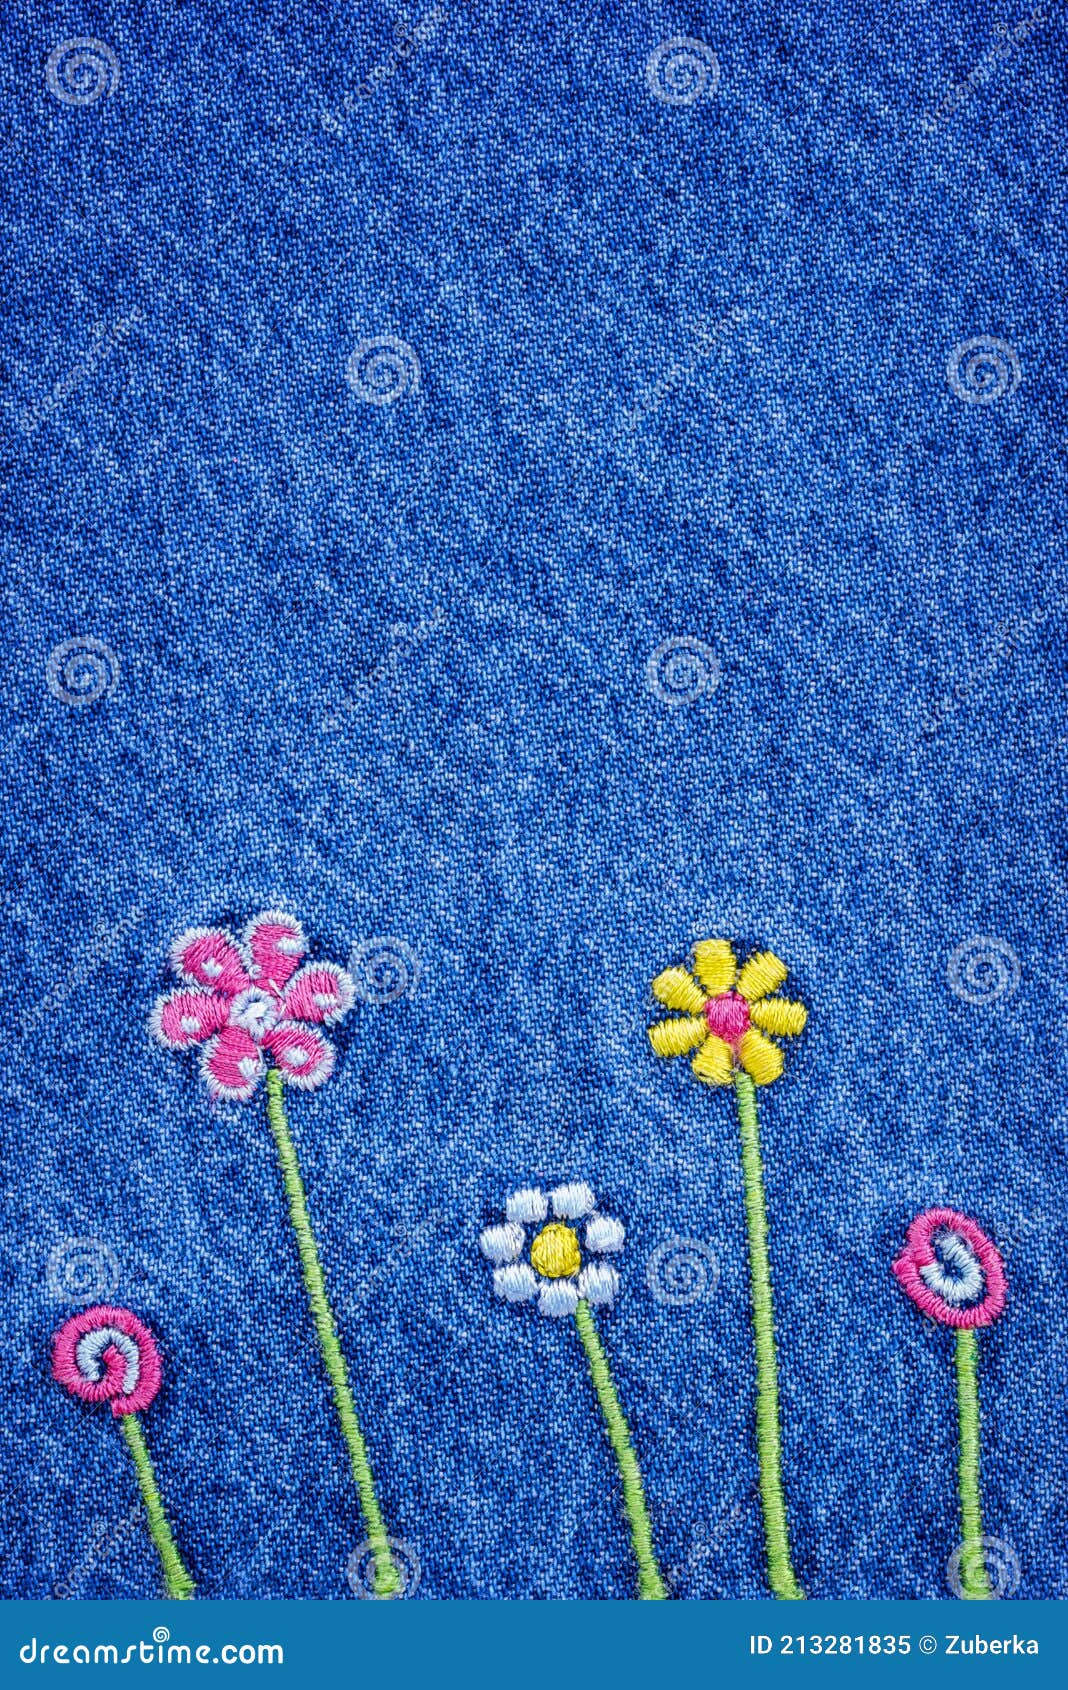 Embroidered 5 Flowers on Jeans Stock Image - Image of jeans, yellow ...